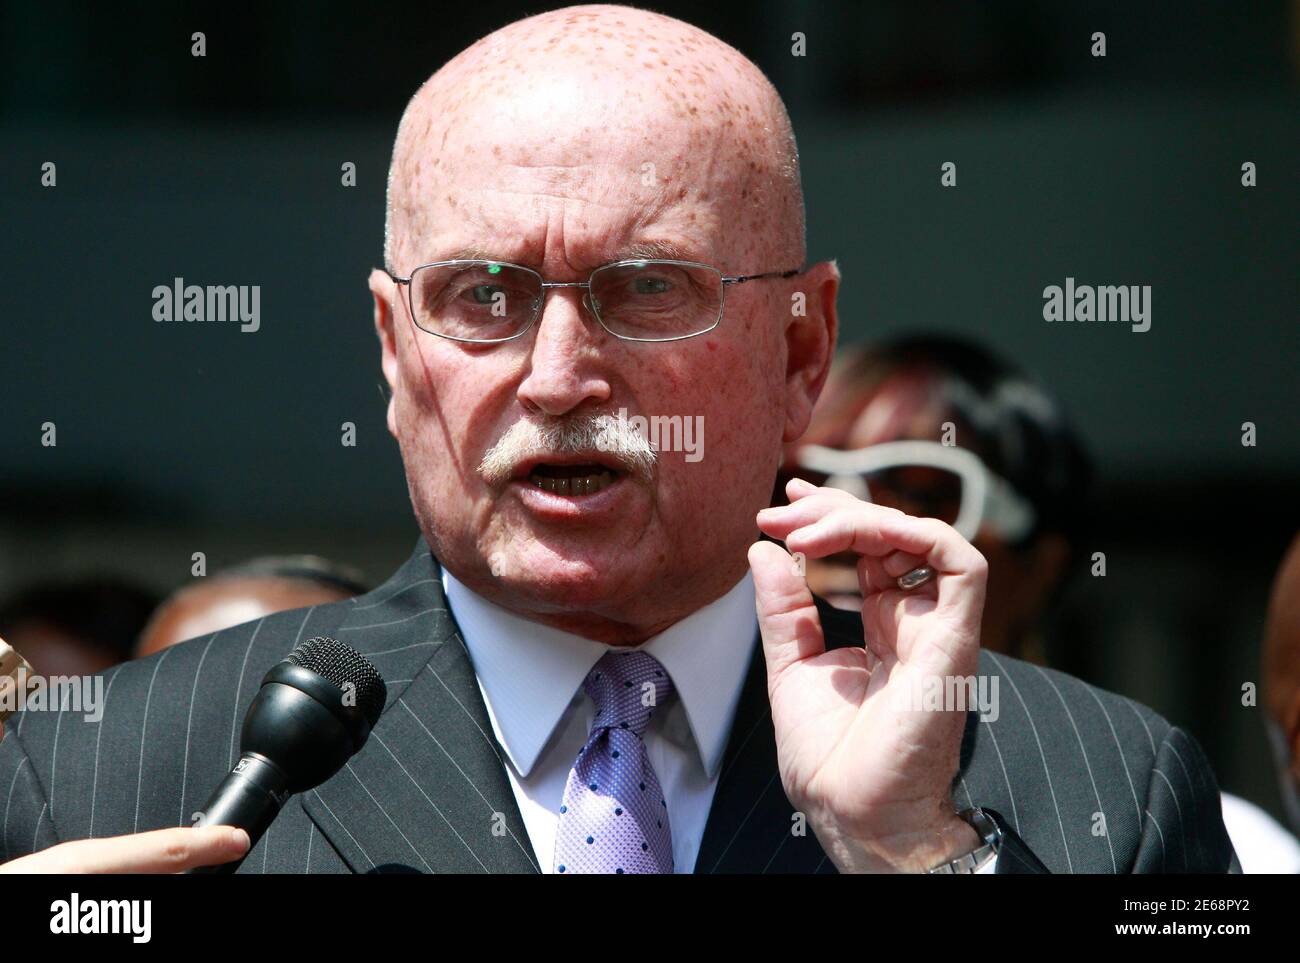 Defense attorney Jack McMahon, who represented Philadelphia abortion doctor Kermit Gosnell, makes remarks after Gosnell was sentenced at the criminal justice facility in Philadelphia, Pennsylvania, May 15, 2013. Gosnell was sent to prison to serve three life terms without parole for murdering babies during late-term abortions and other crimes at his squalid clinic in Philadelphia.  REUTERS/Tim Shaffer  (UNITED STATES - Tags: CRIME LAW HEALTH) Stock Photo